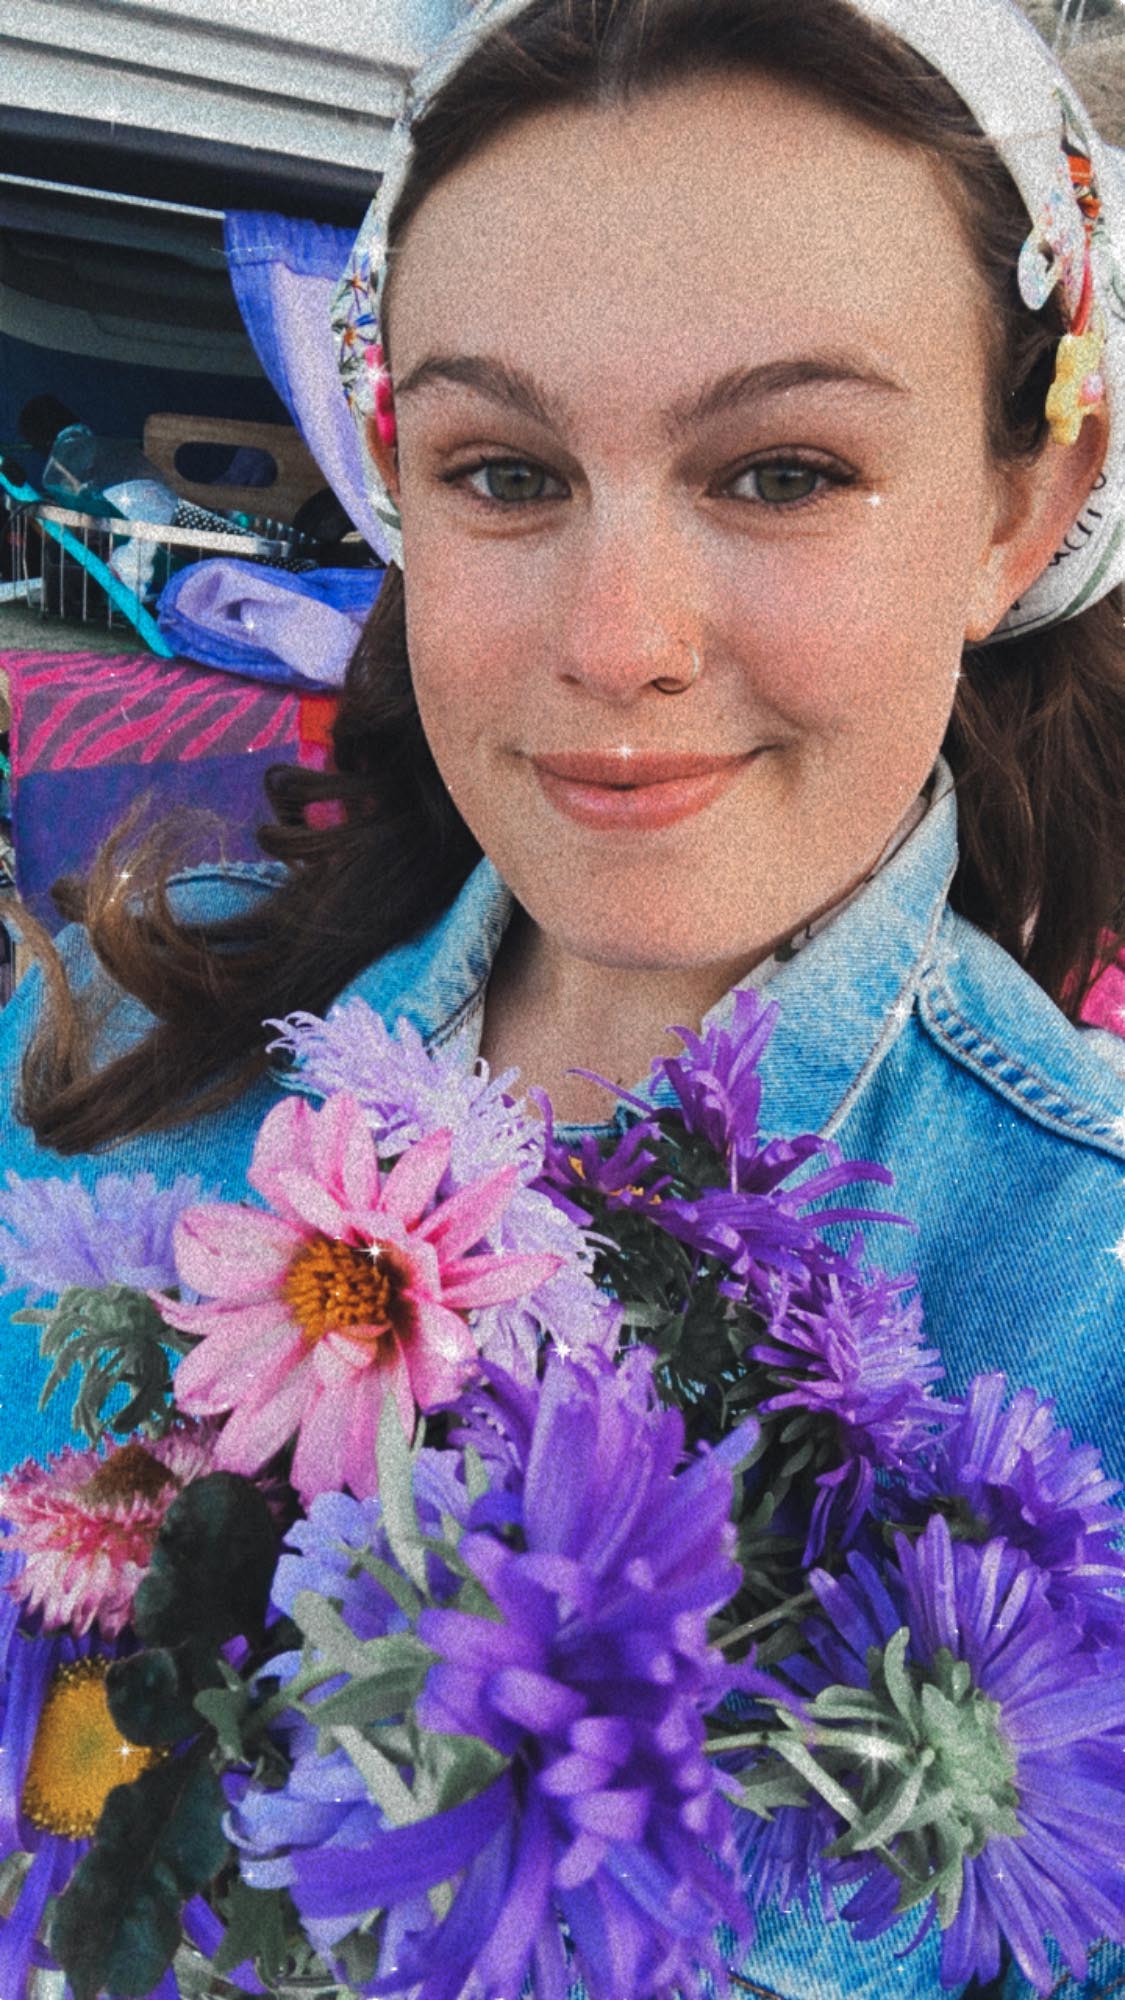 Selfie by Jess Thompson Carr wearing a head scarf, colourful pins and holding a bouquet of flowers